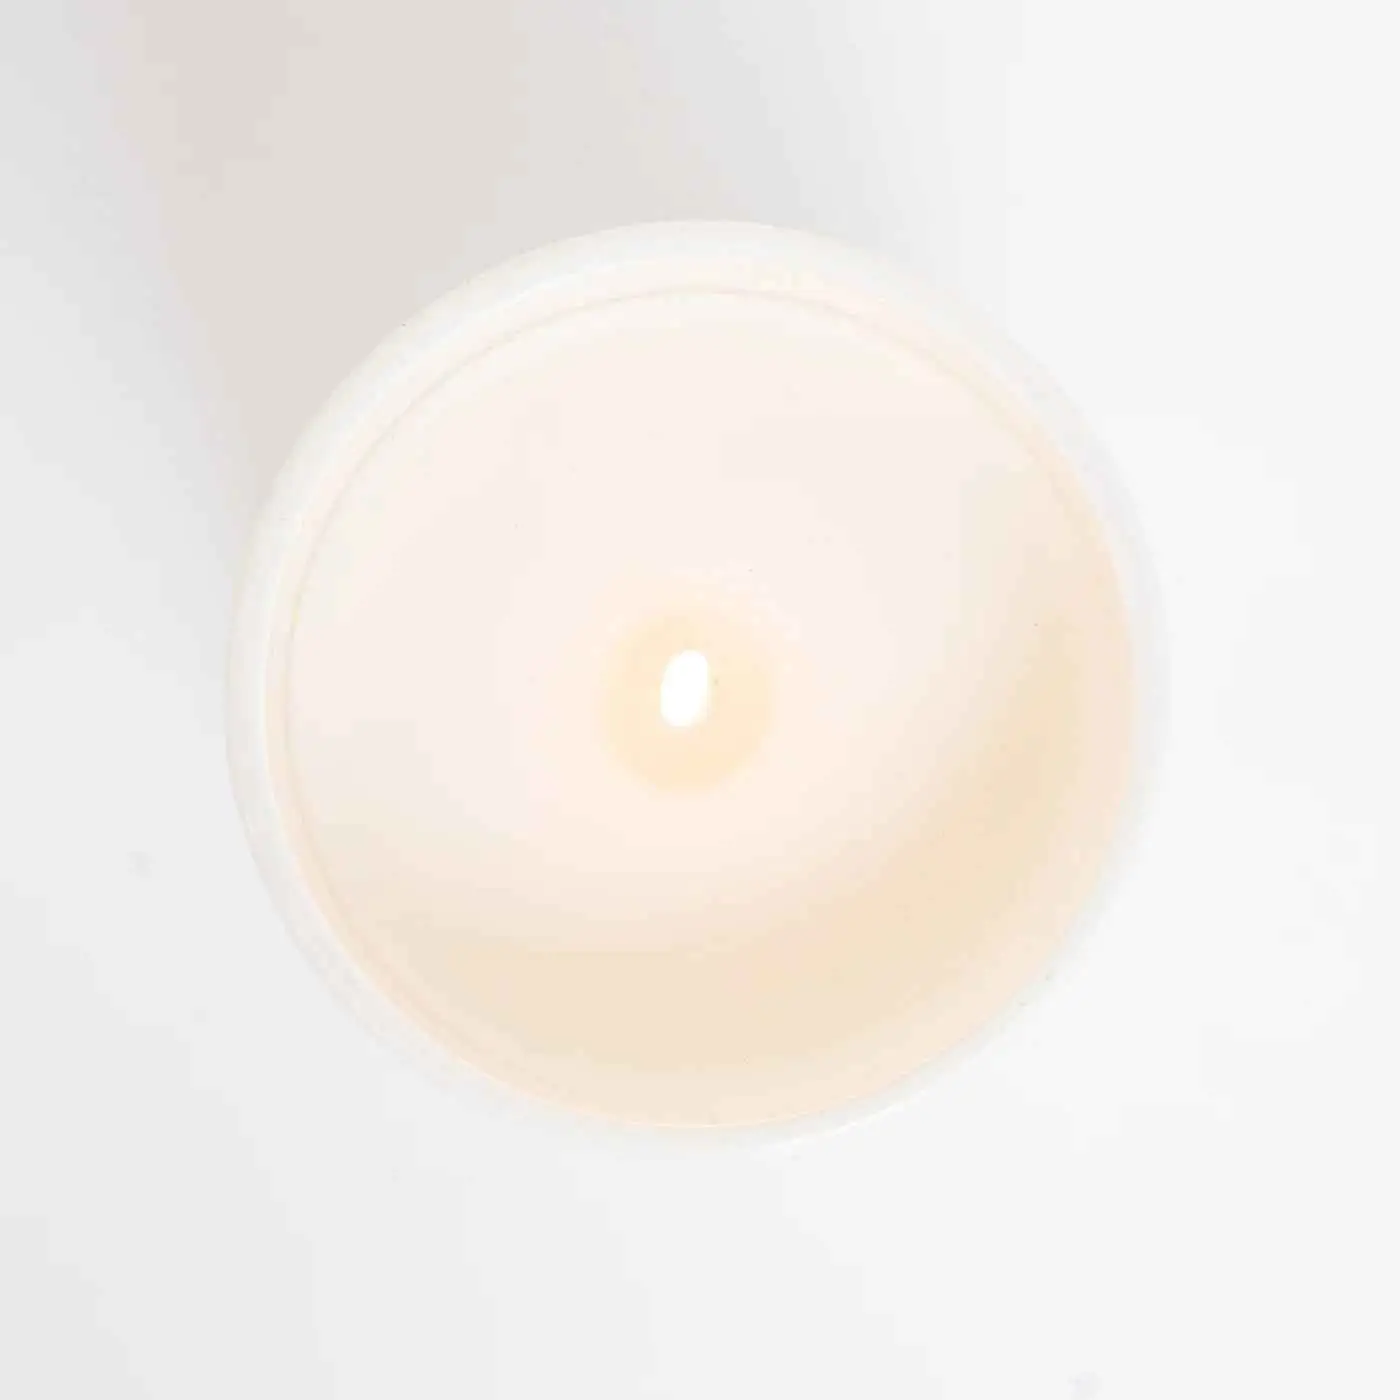 Aglio Scented Candle Delivery